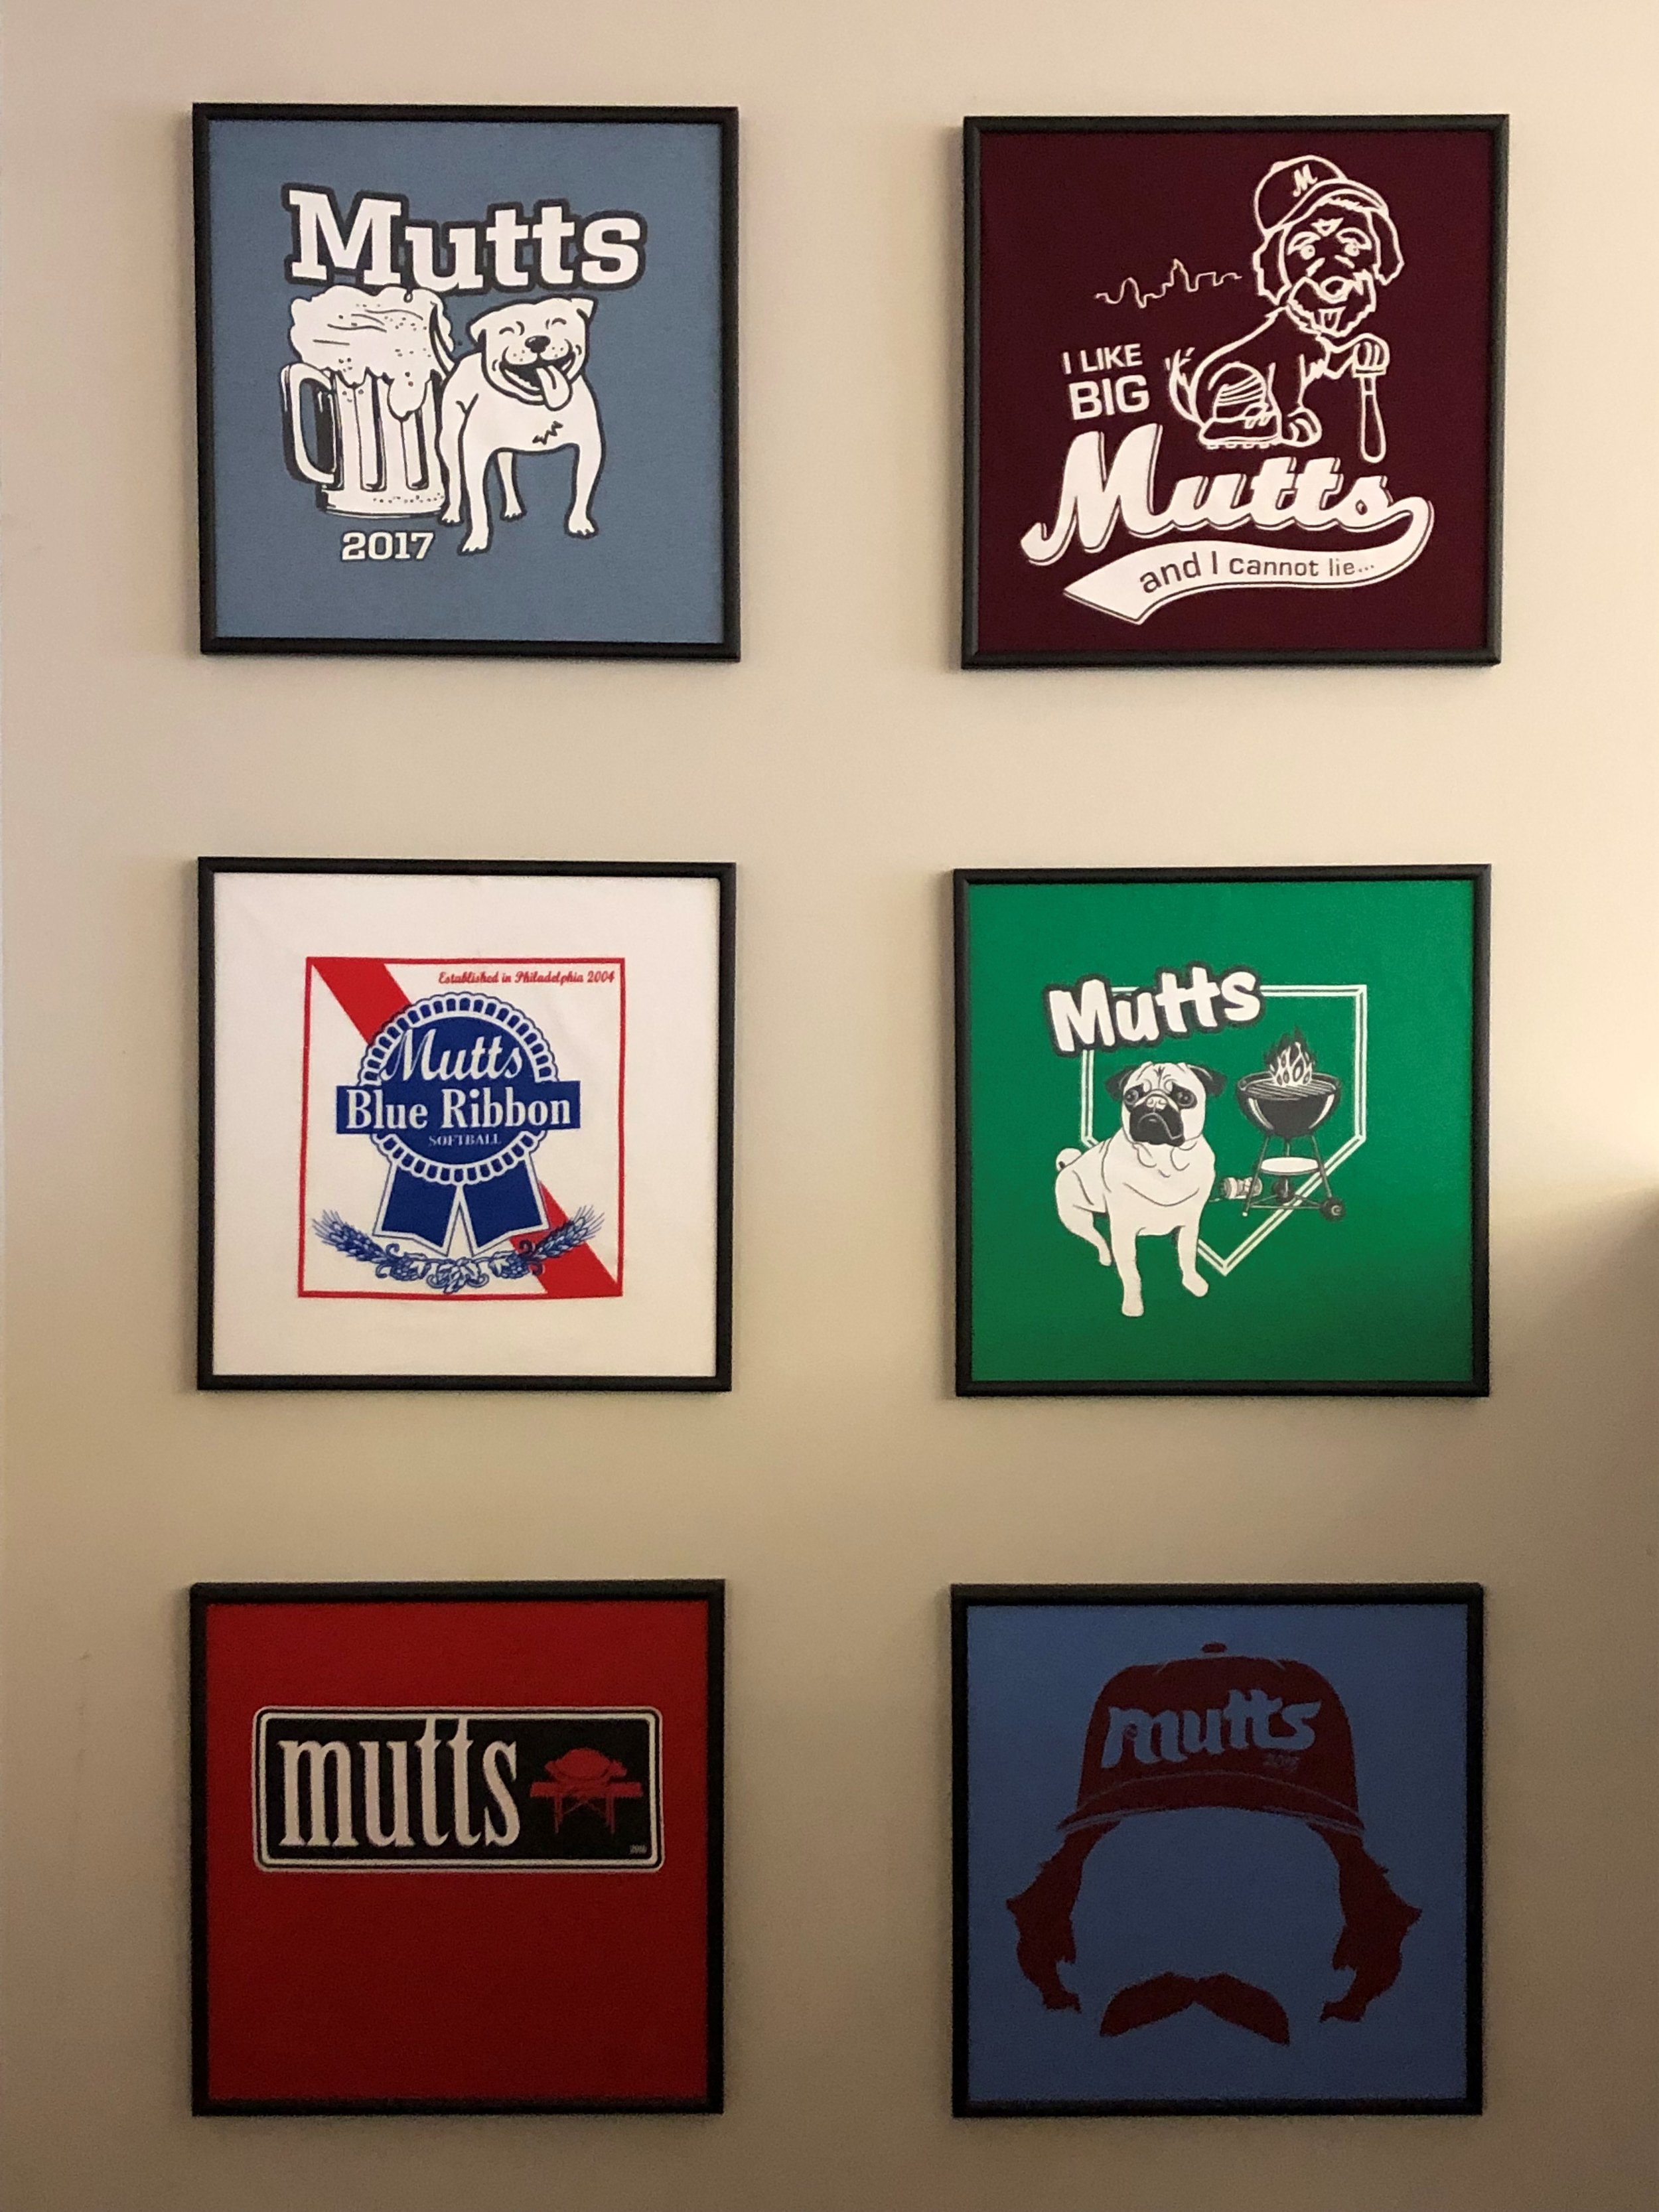 Mutts shirts gallery